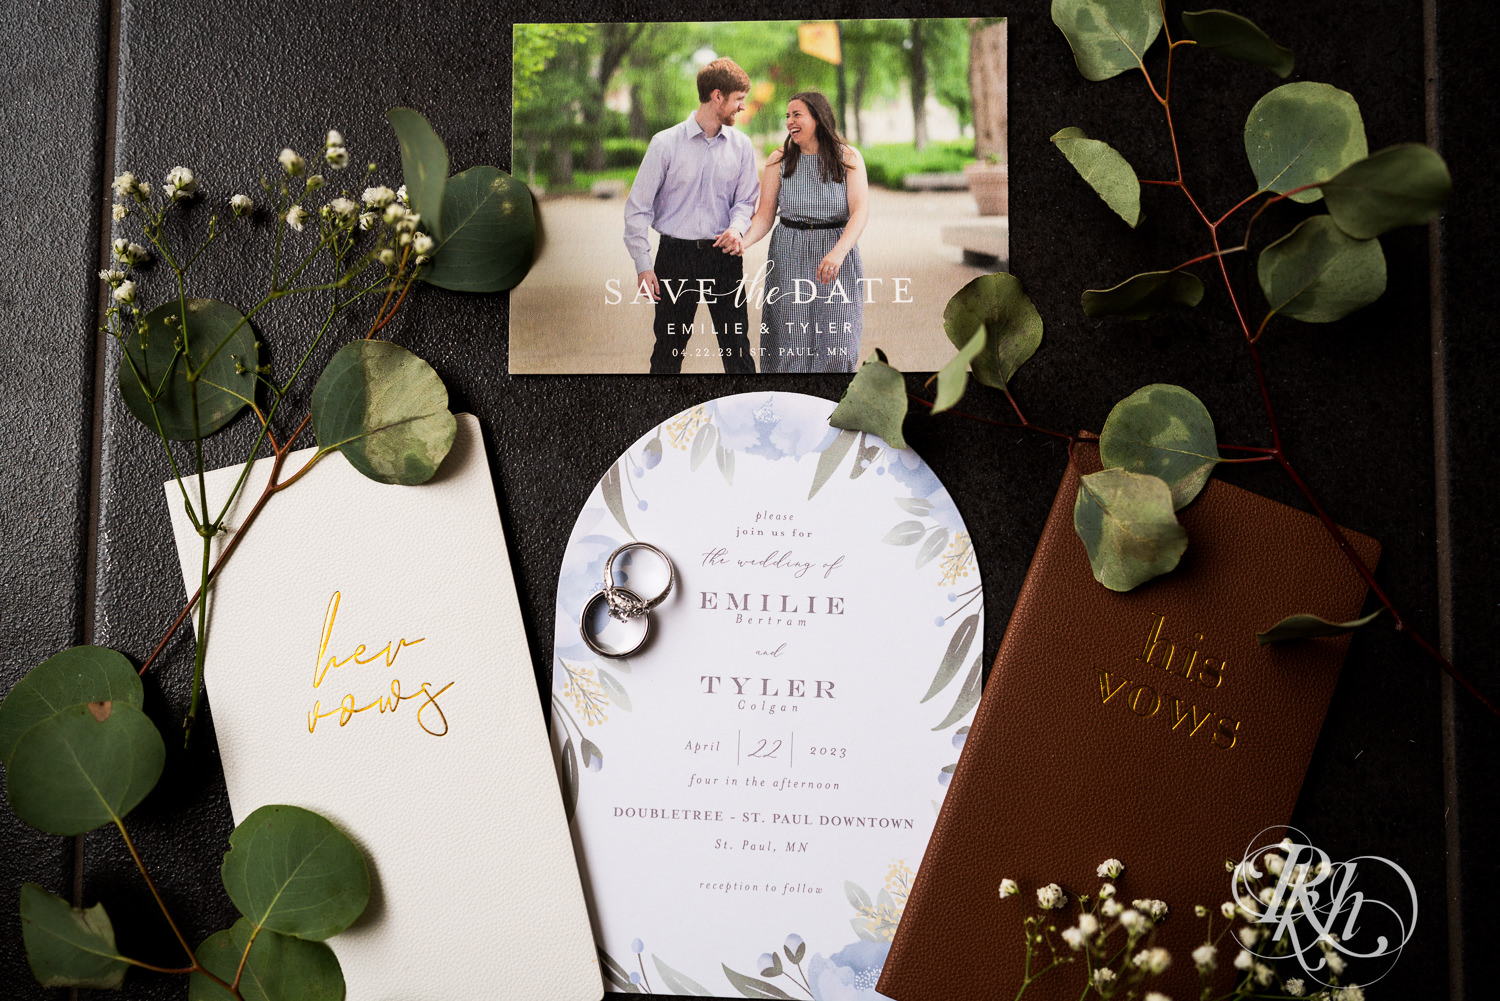 Wedding suite including rings, save the date, invitation, vow books and flowers. 